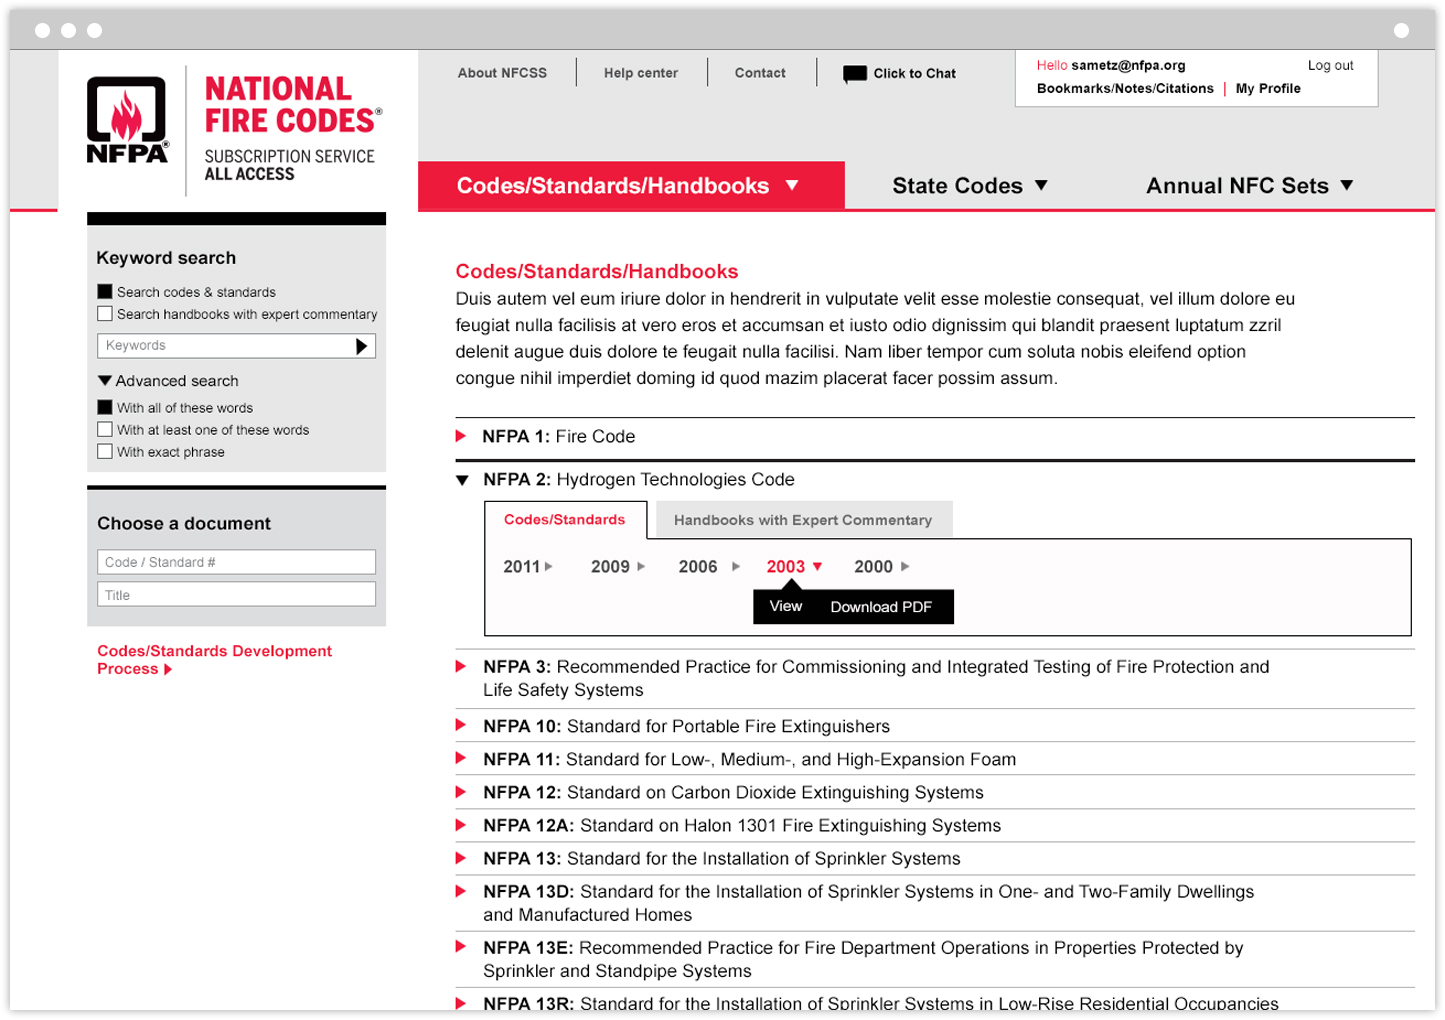 National Fire Codes Subscription Service web tool interior page